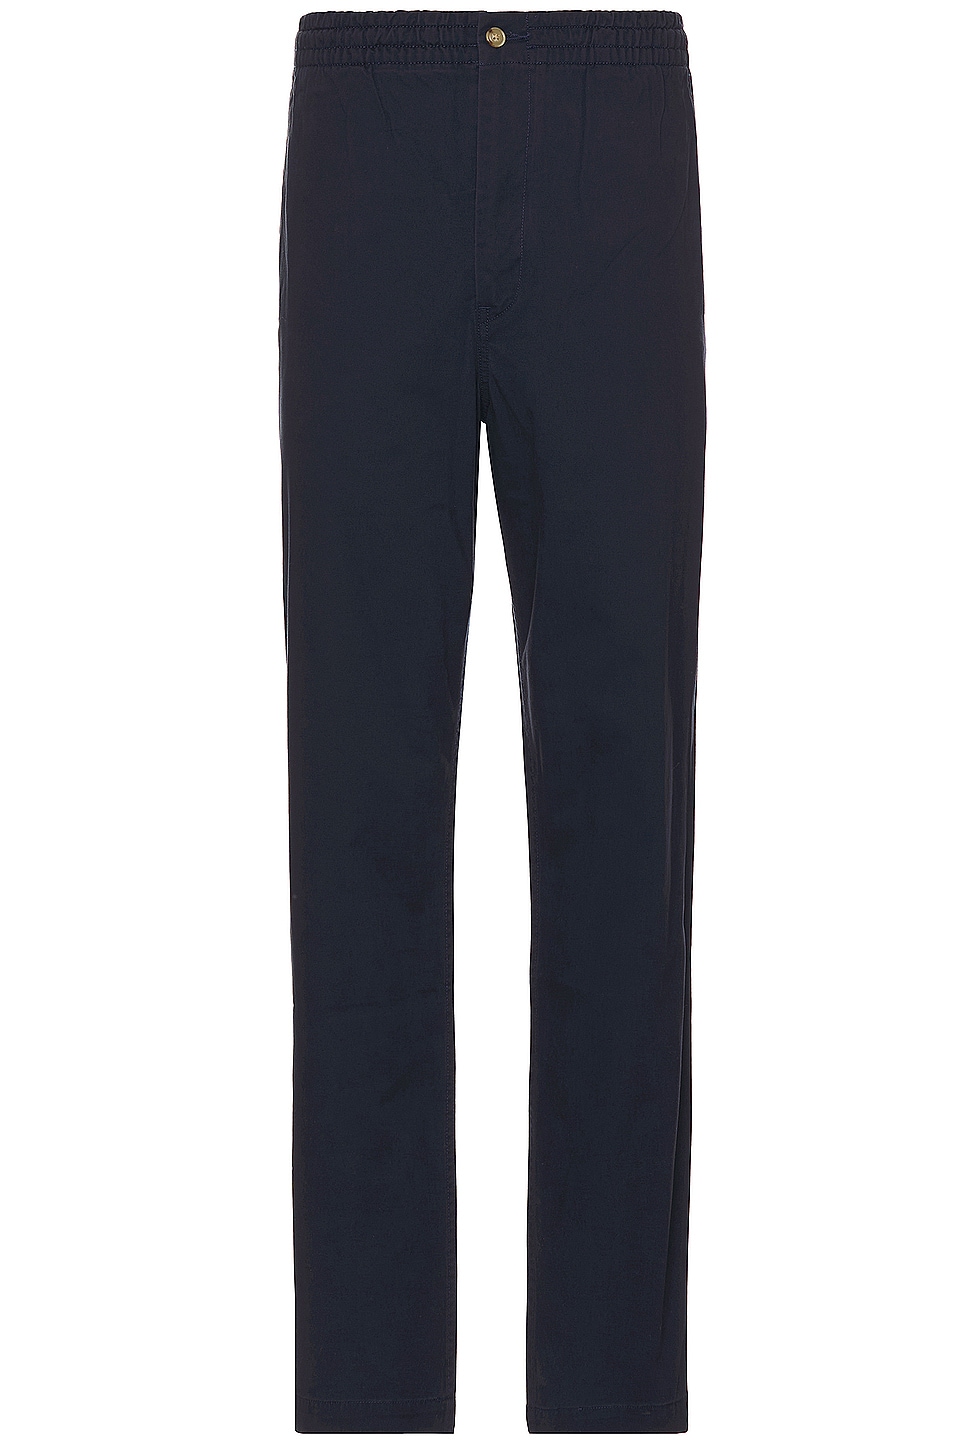 Image 1 of Polo Ralph Lauren Prepster Pant in Nautical Ink